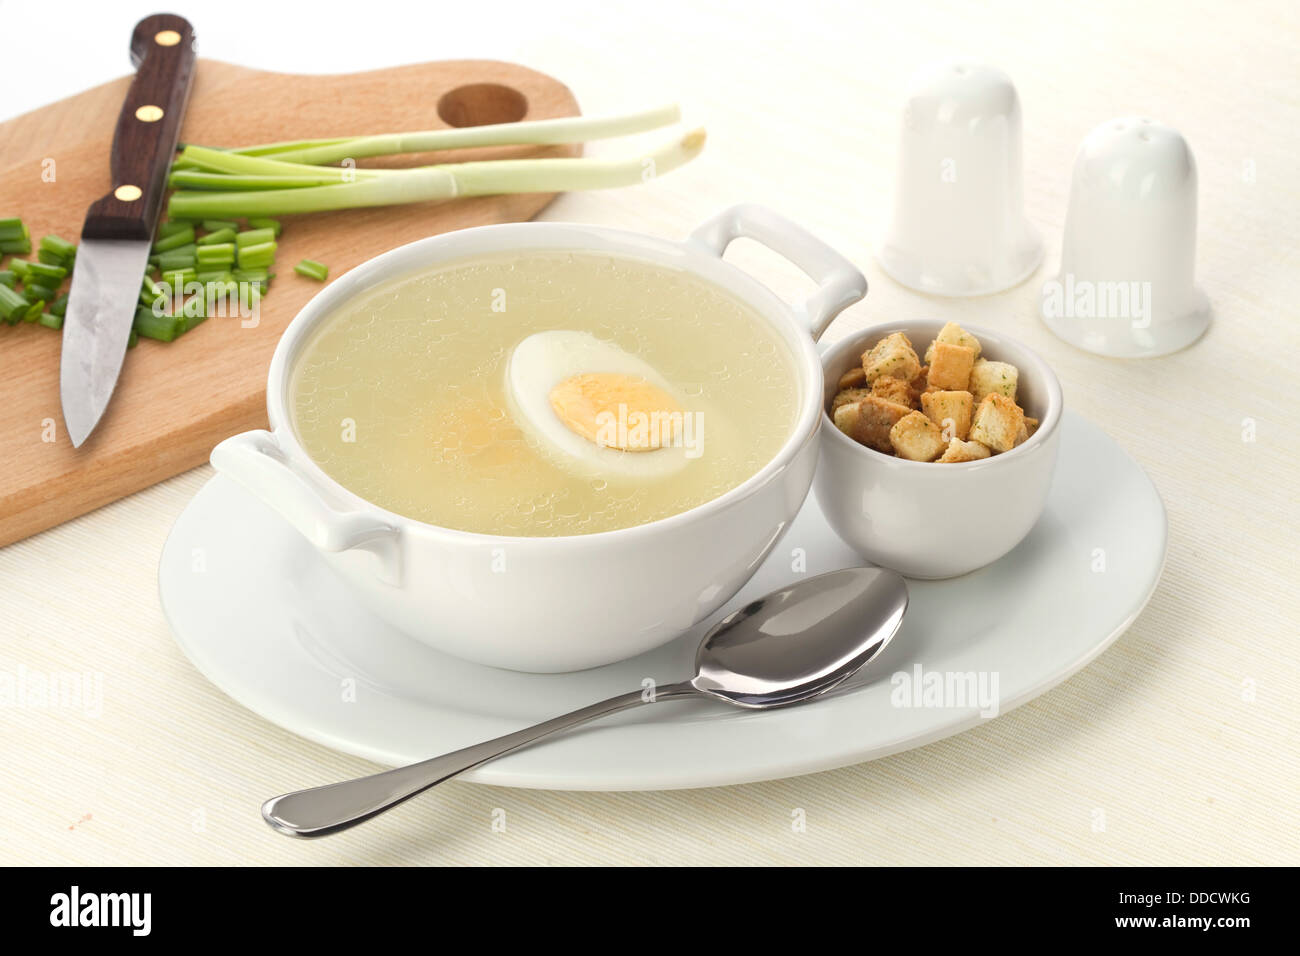 Served place setting with chicken broth and croutons Stock Photo